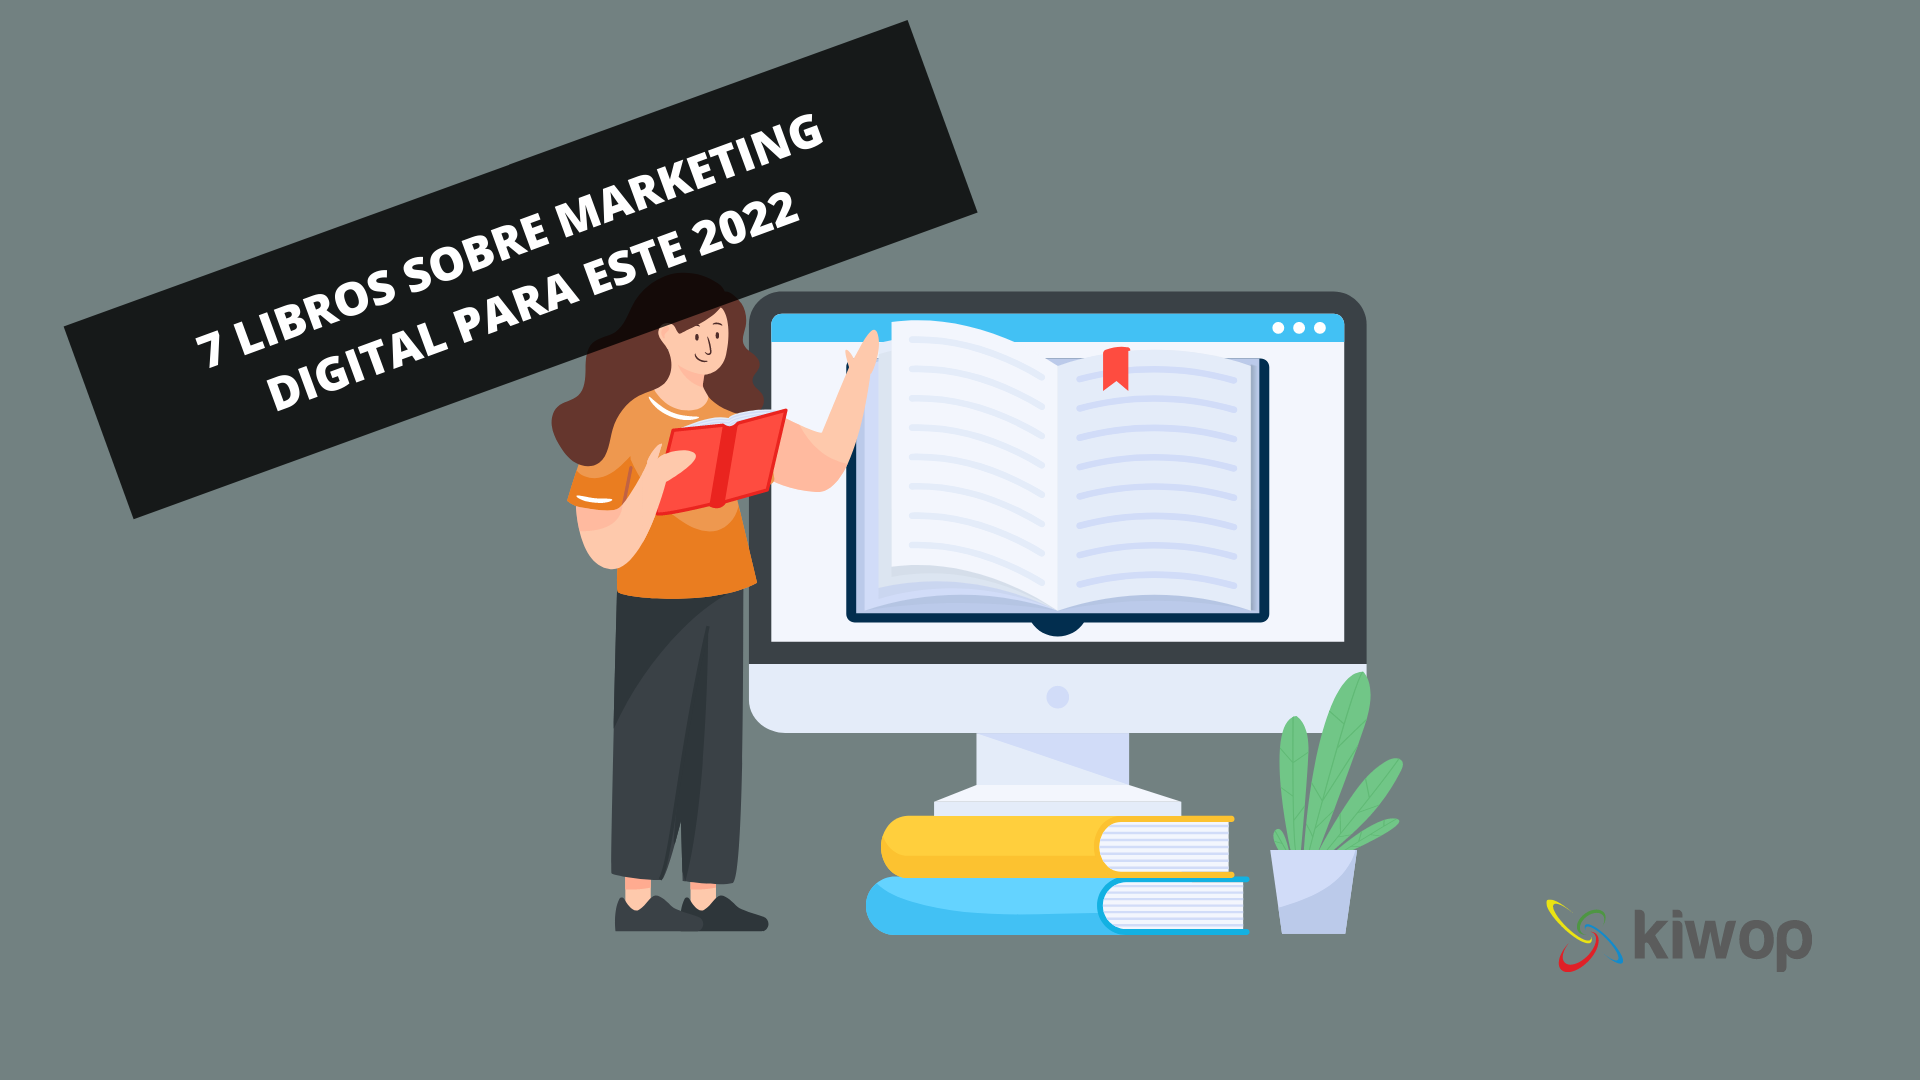 7 books on digital marketing for this 2022